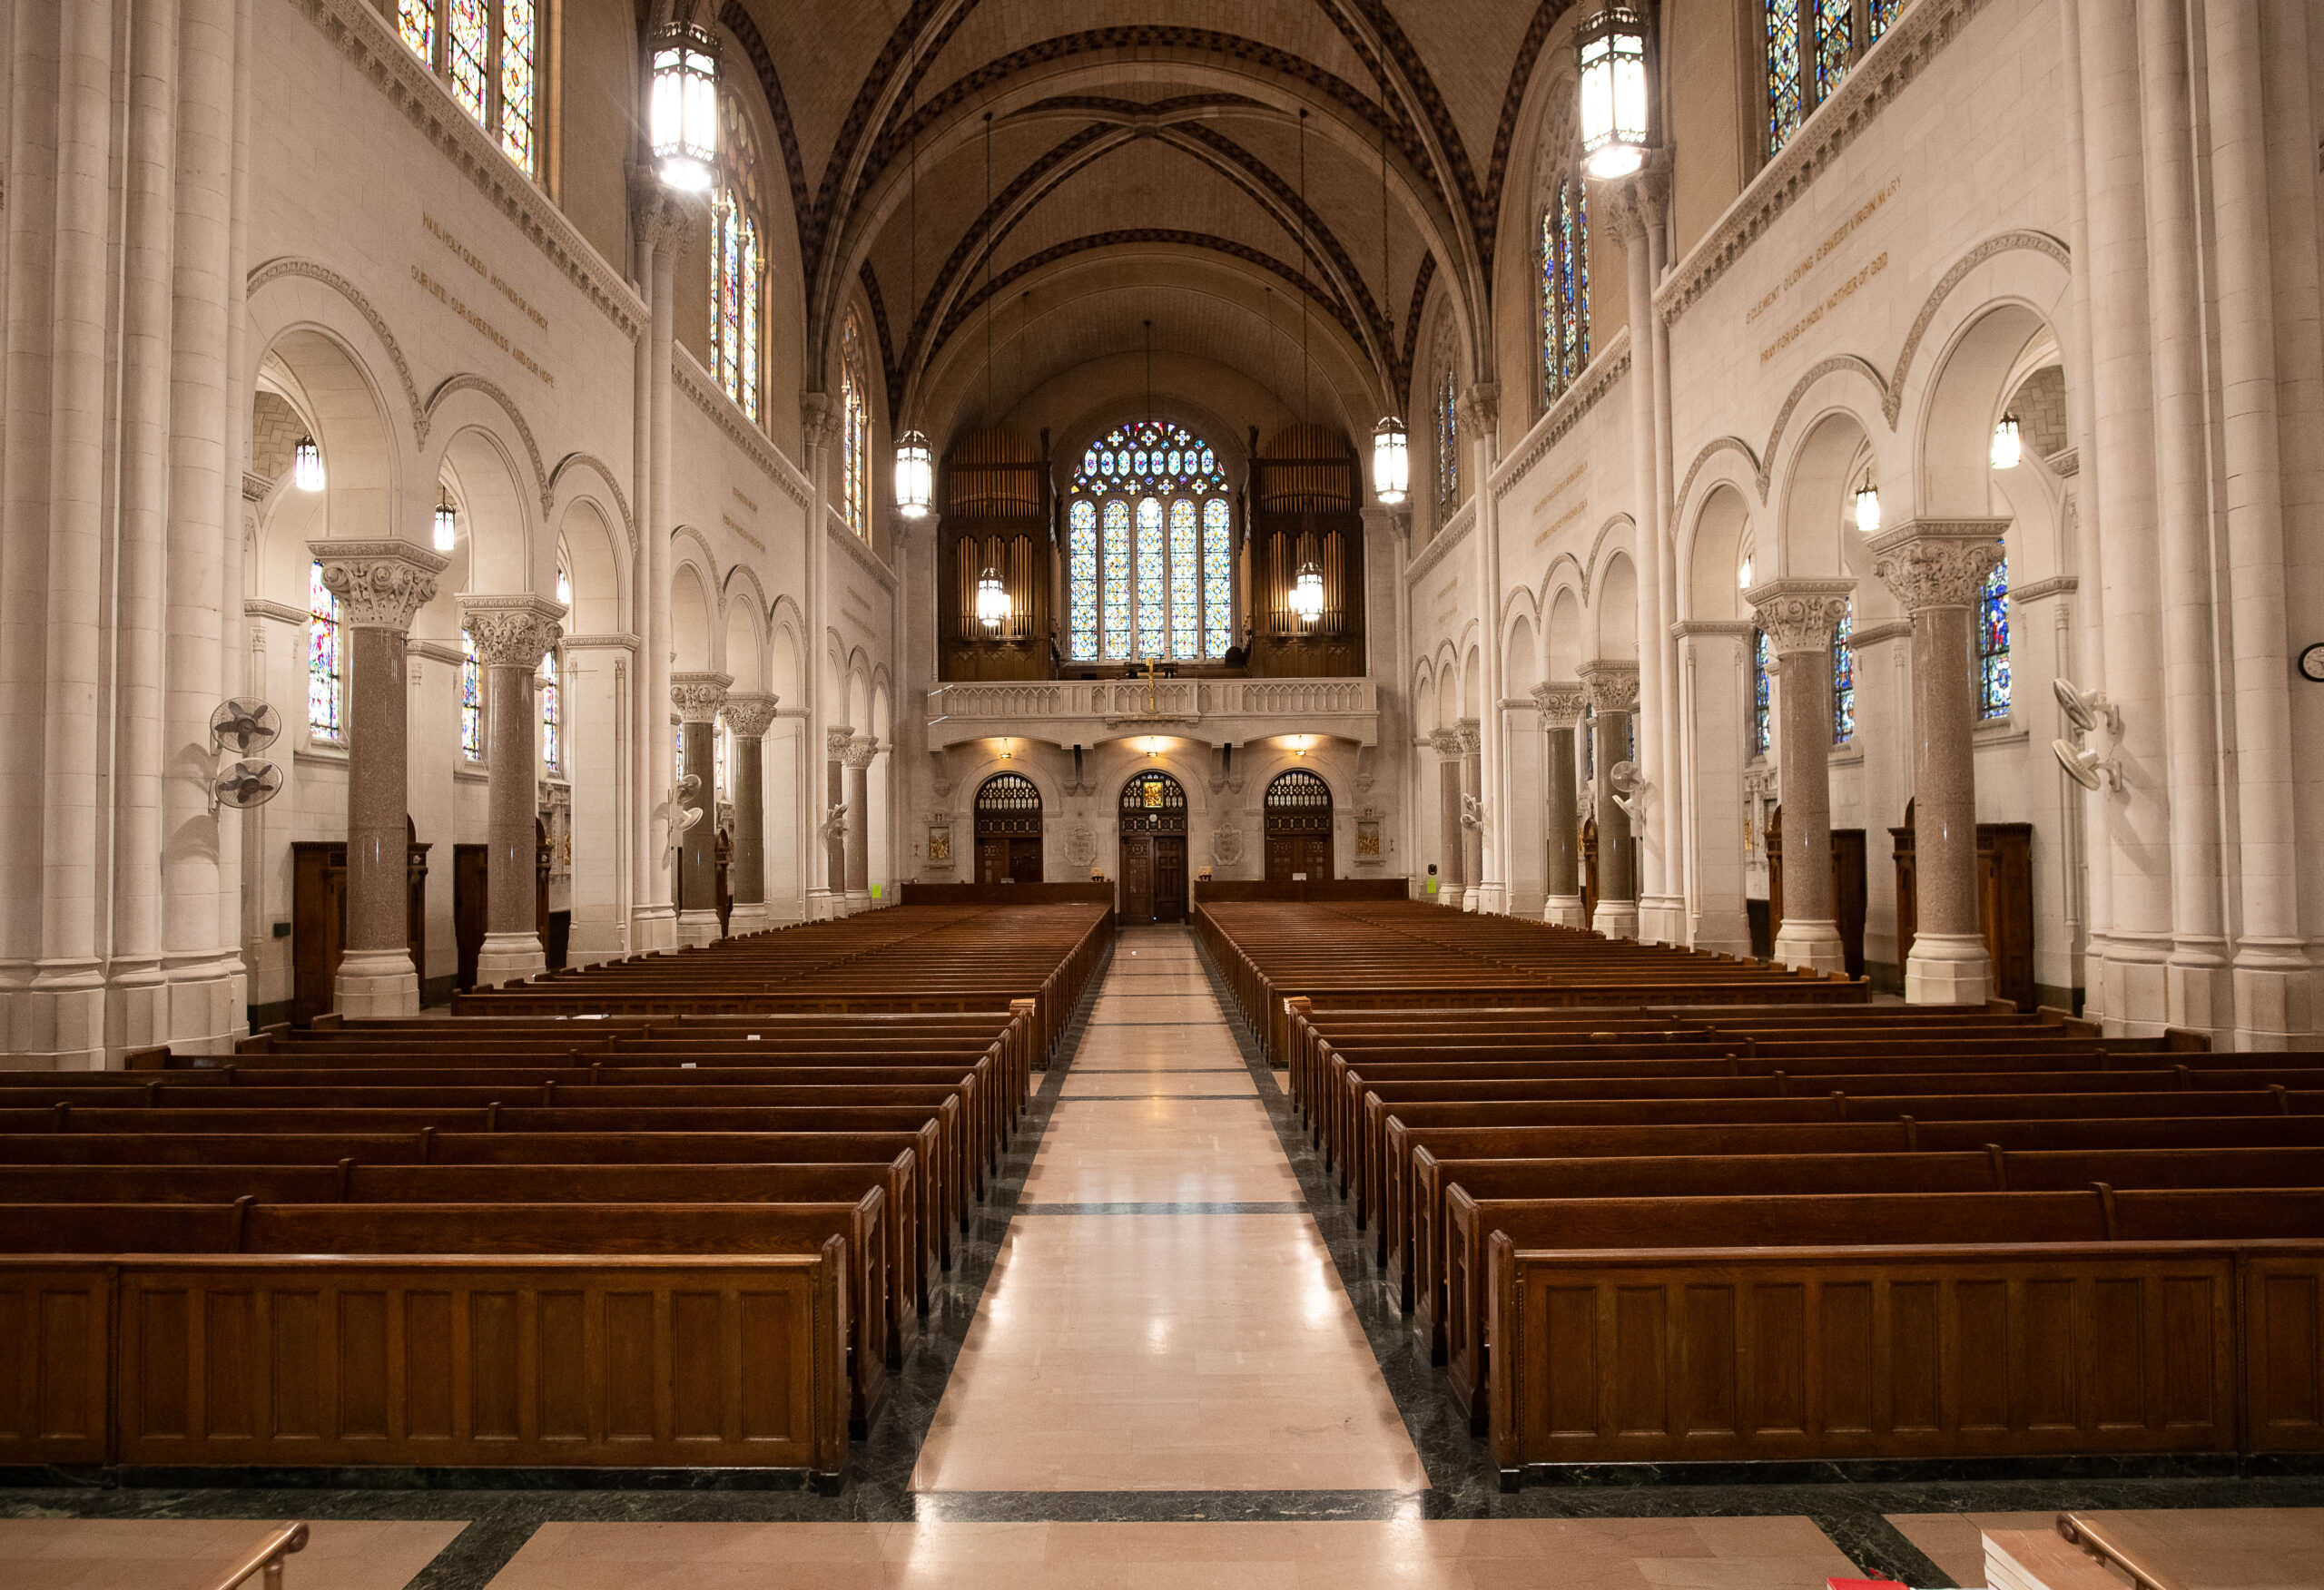 Interior of a cathedral showing long rows of wooden pews leading to an altar, with ornate stained glass windows, arched ceilings, and intricate columns.